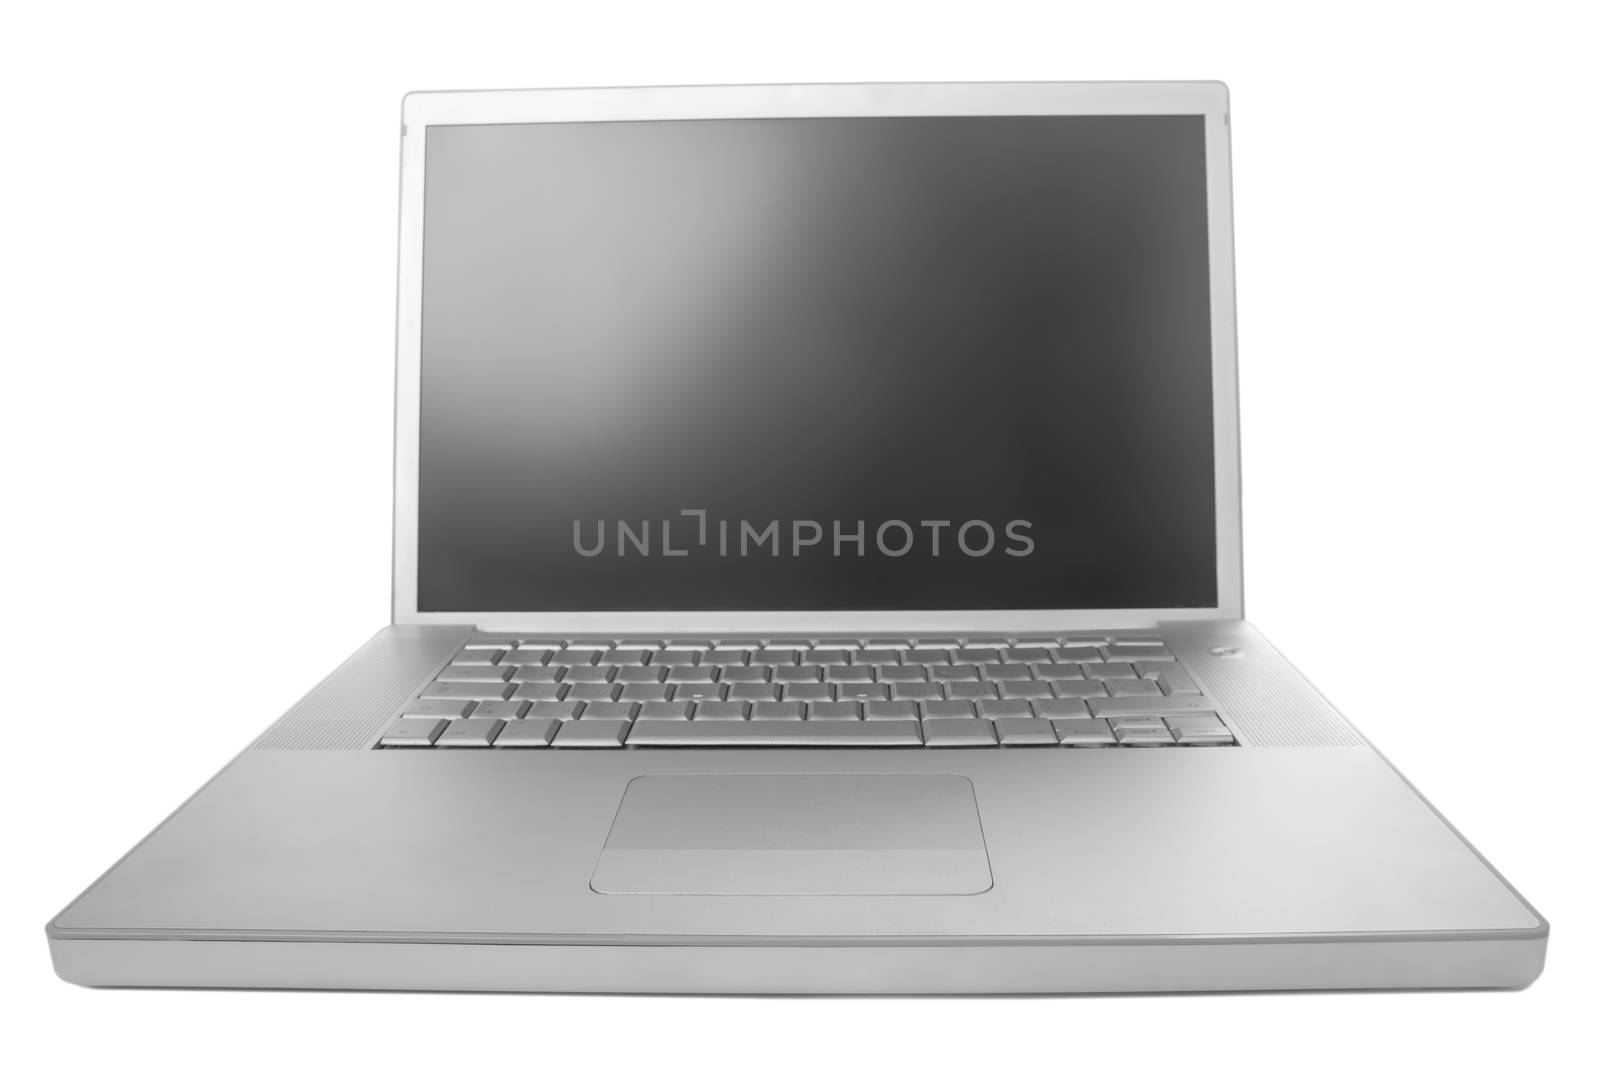 Laptop with gray screen, isolated on white